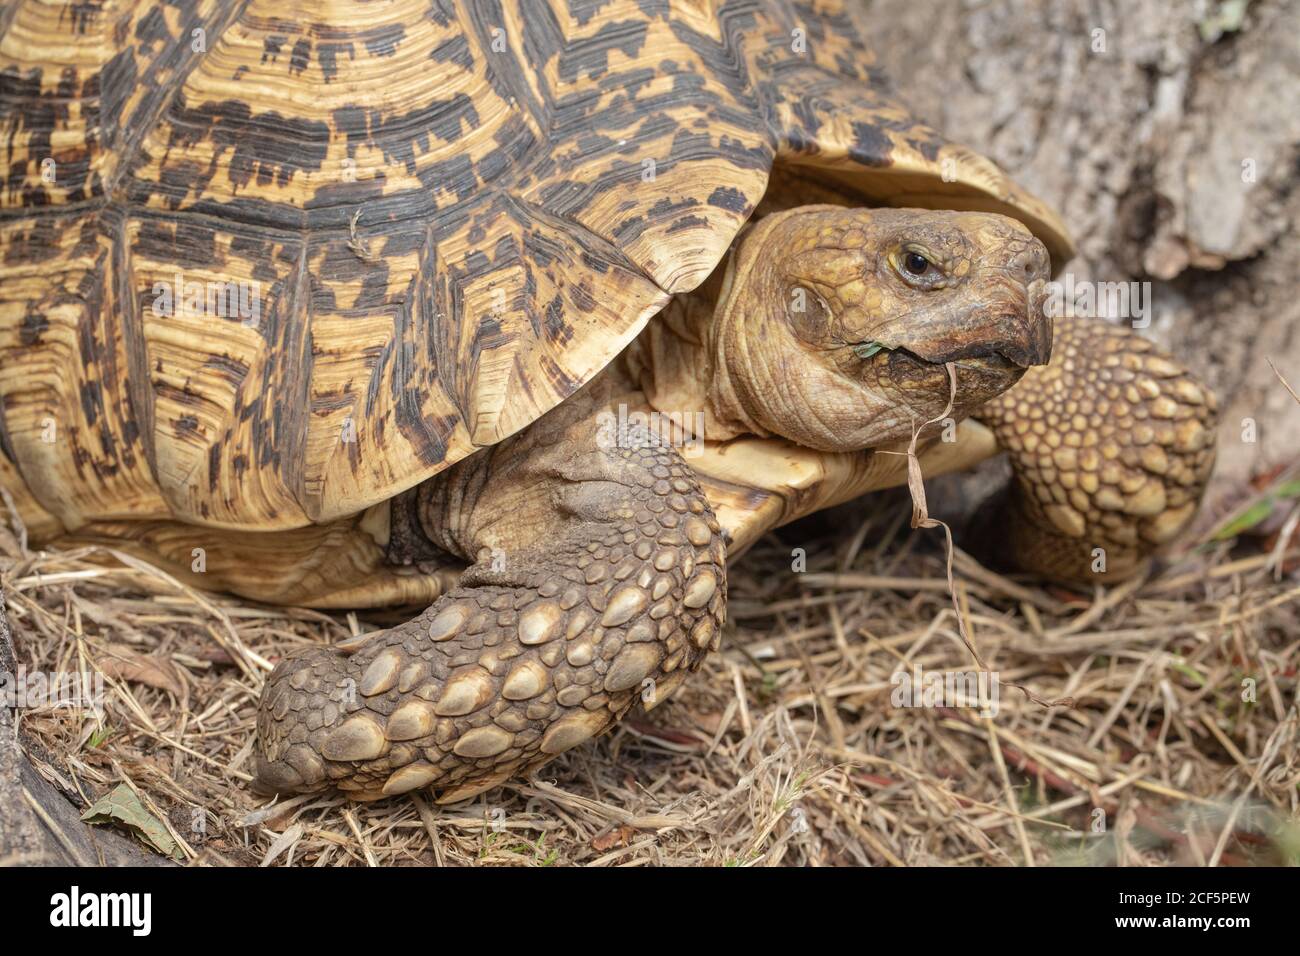 Leopard Tortoise (Stigmochelys pardalis). Foraging for vegetation food. Note heavily scaled front forelimb or leg, of elephantine proportions. Adaptat Stock Photo